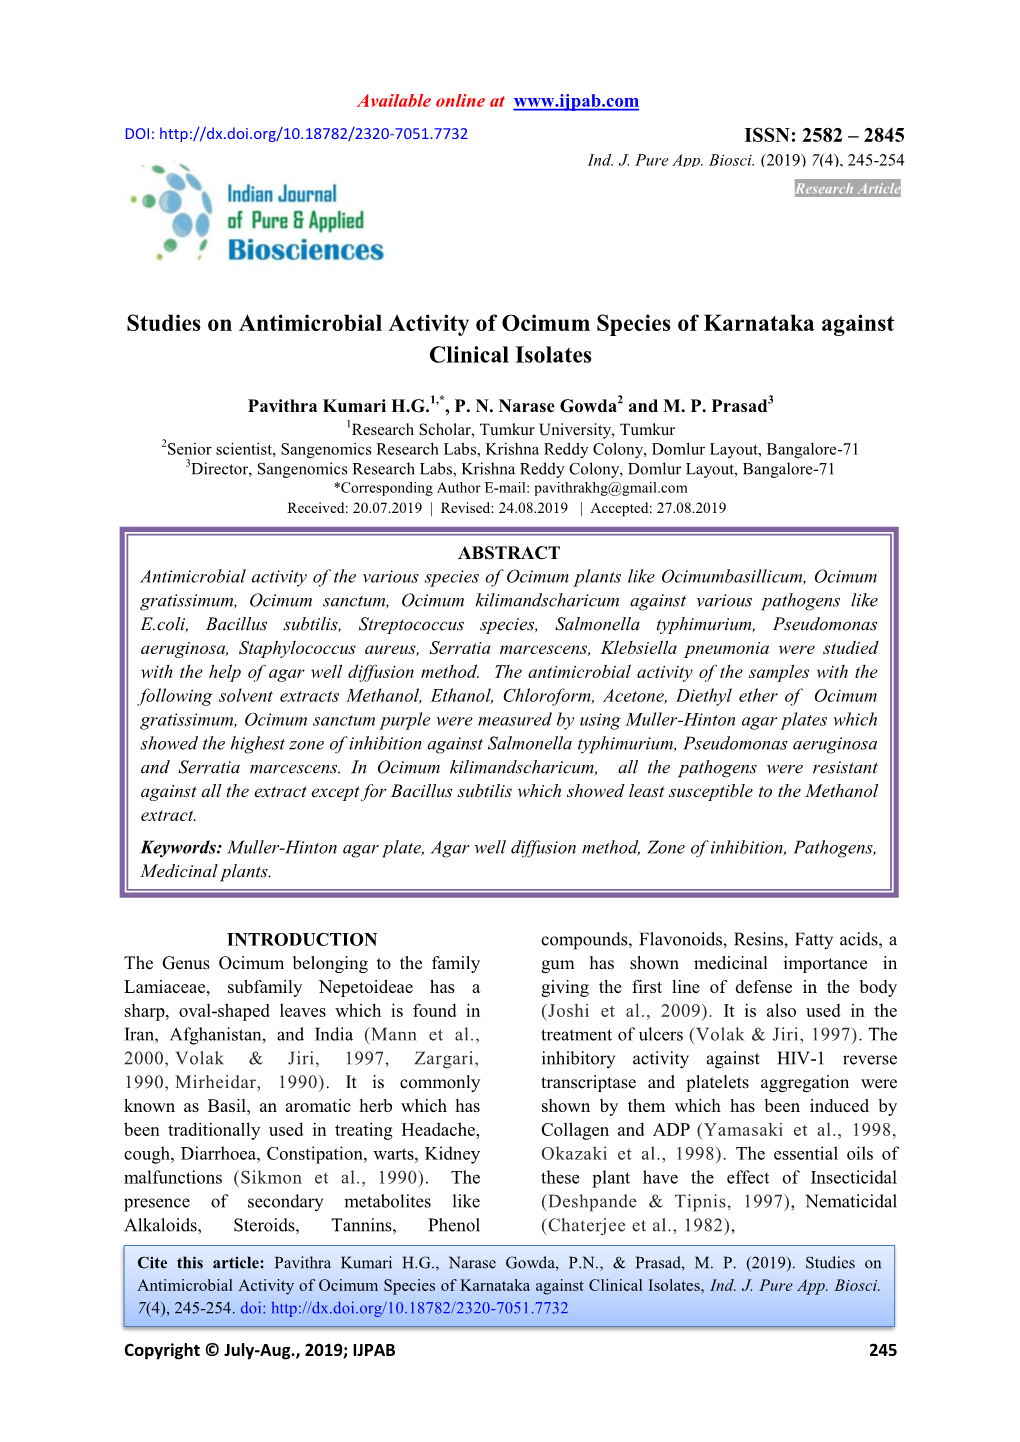 Studies on Antimicrobial Activity of Ocimum Species of Karnataka Against Clinical Isolates